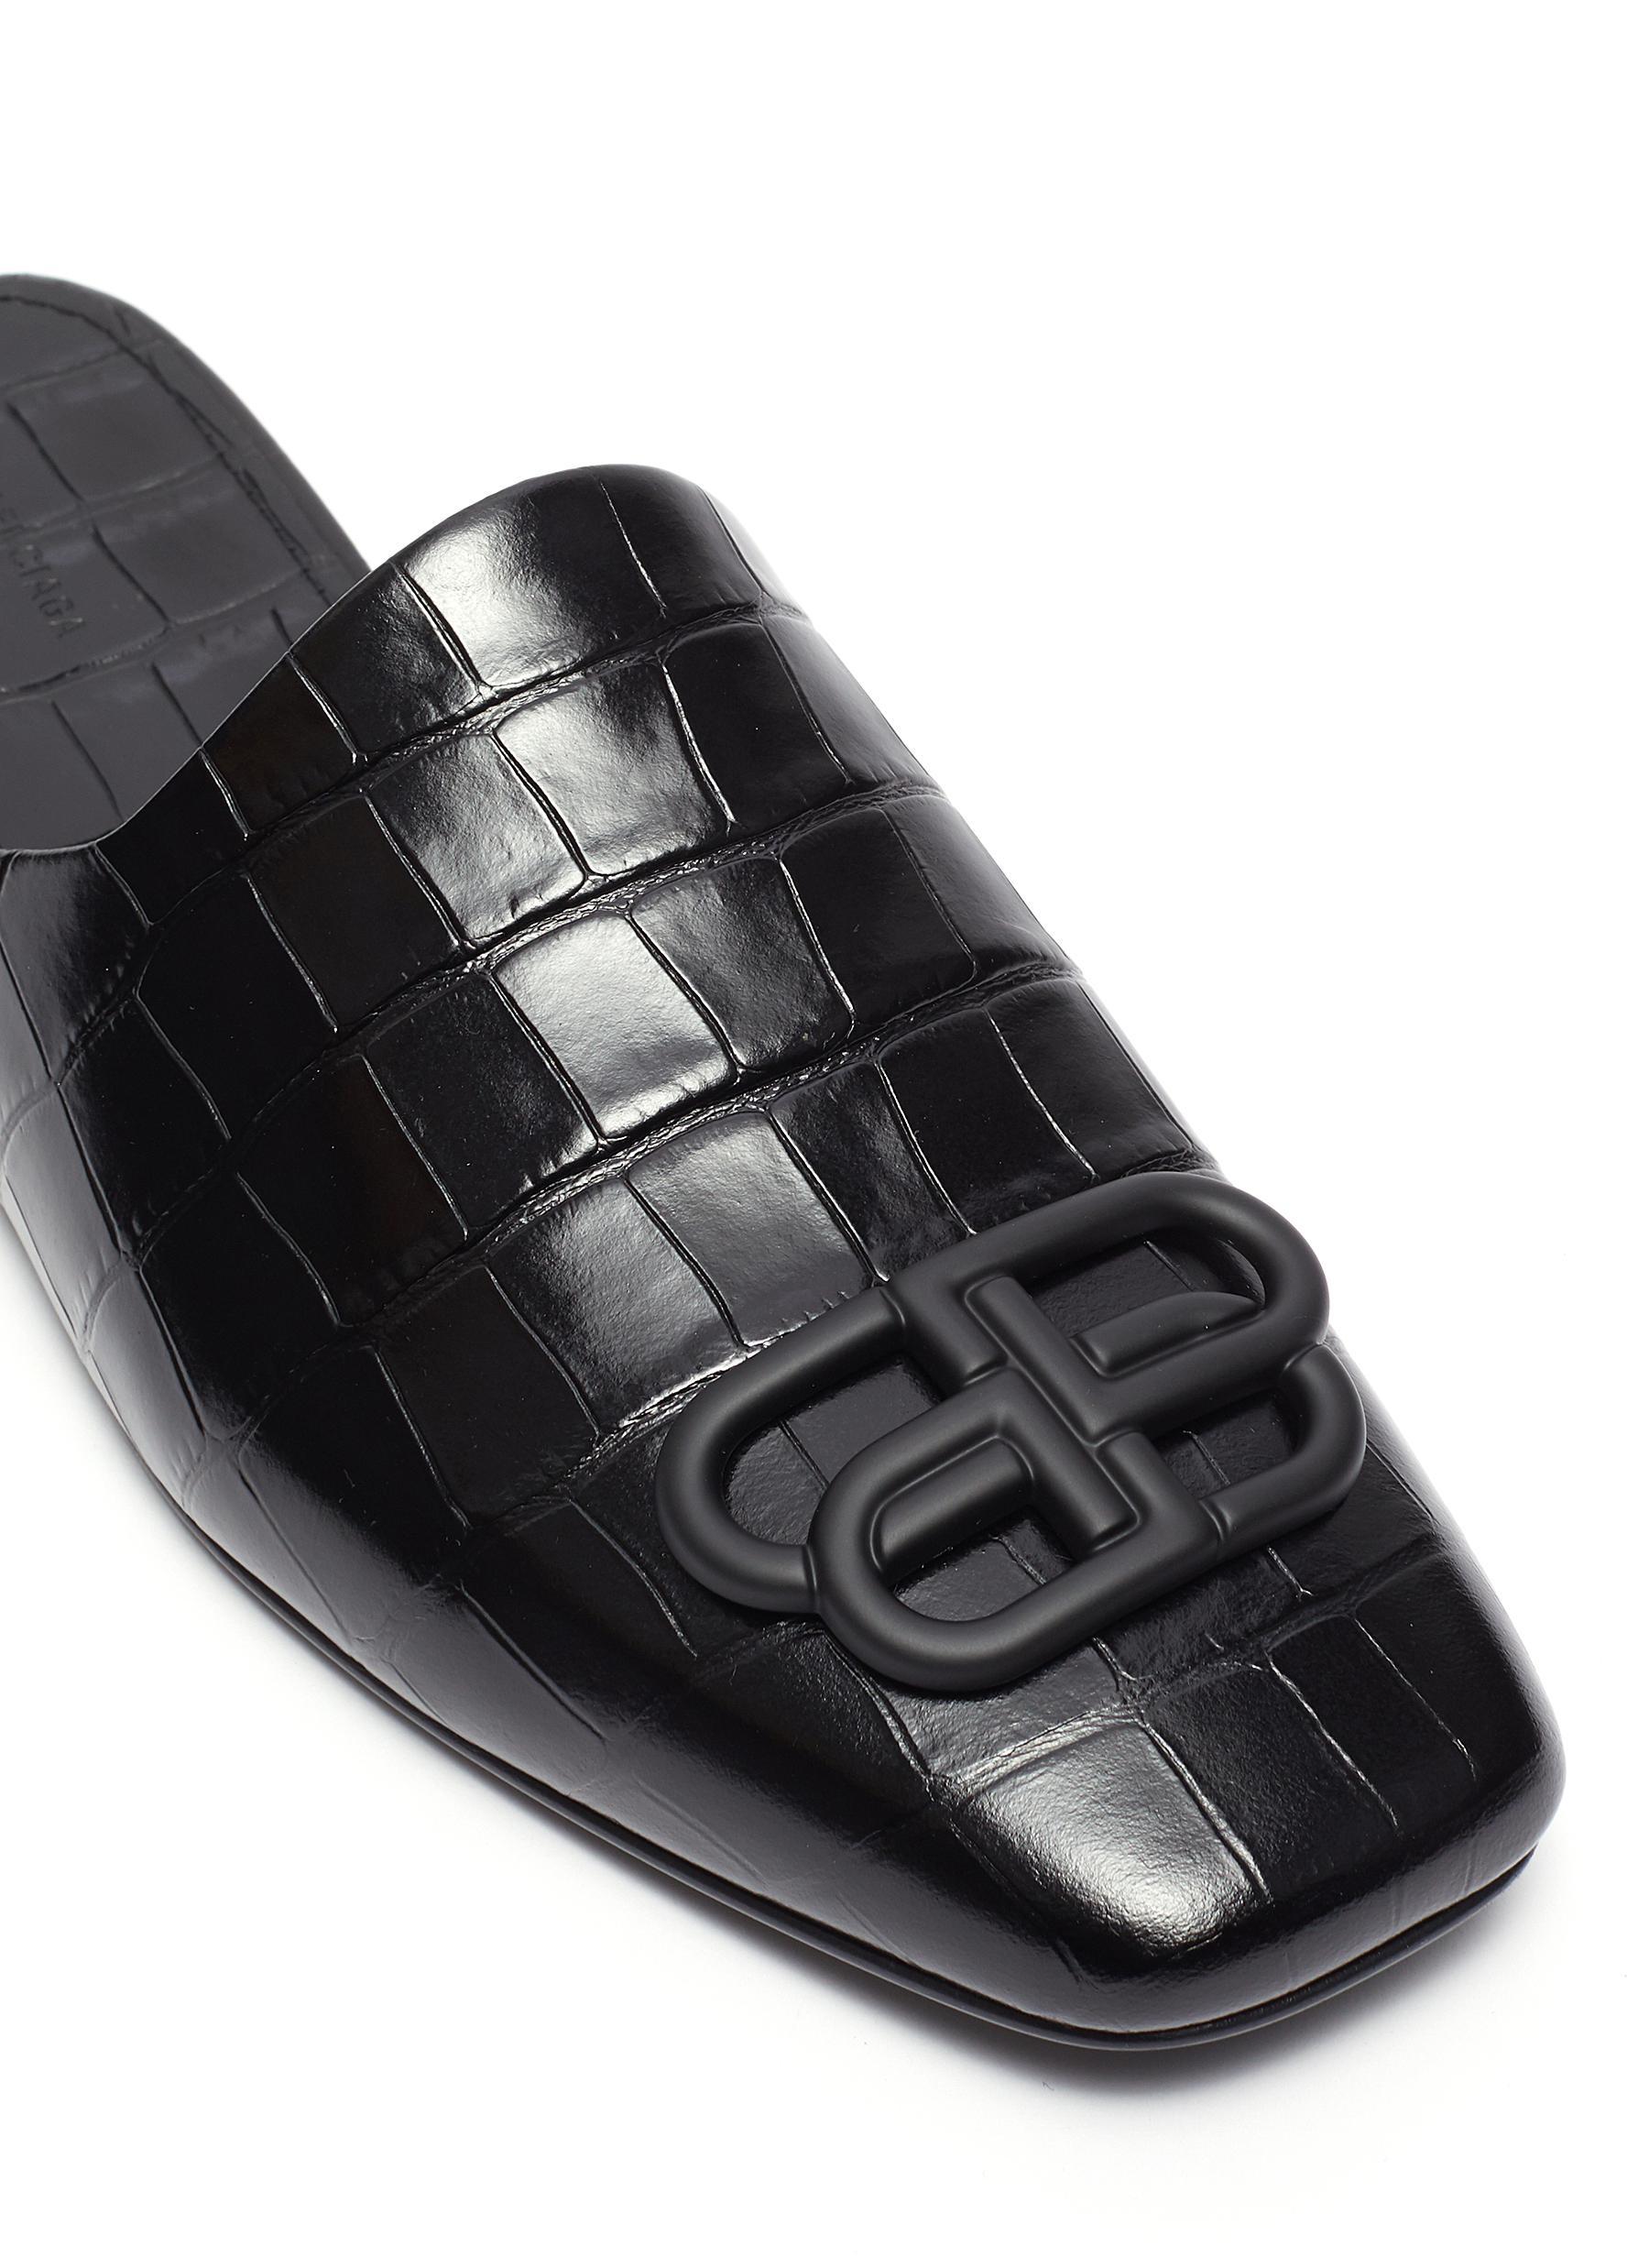 Balenciaga 'cosy' Bb Logo Embellished Croc Embossed Leather Mules in